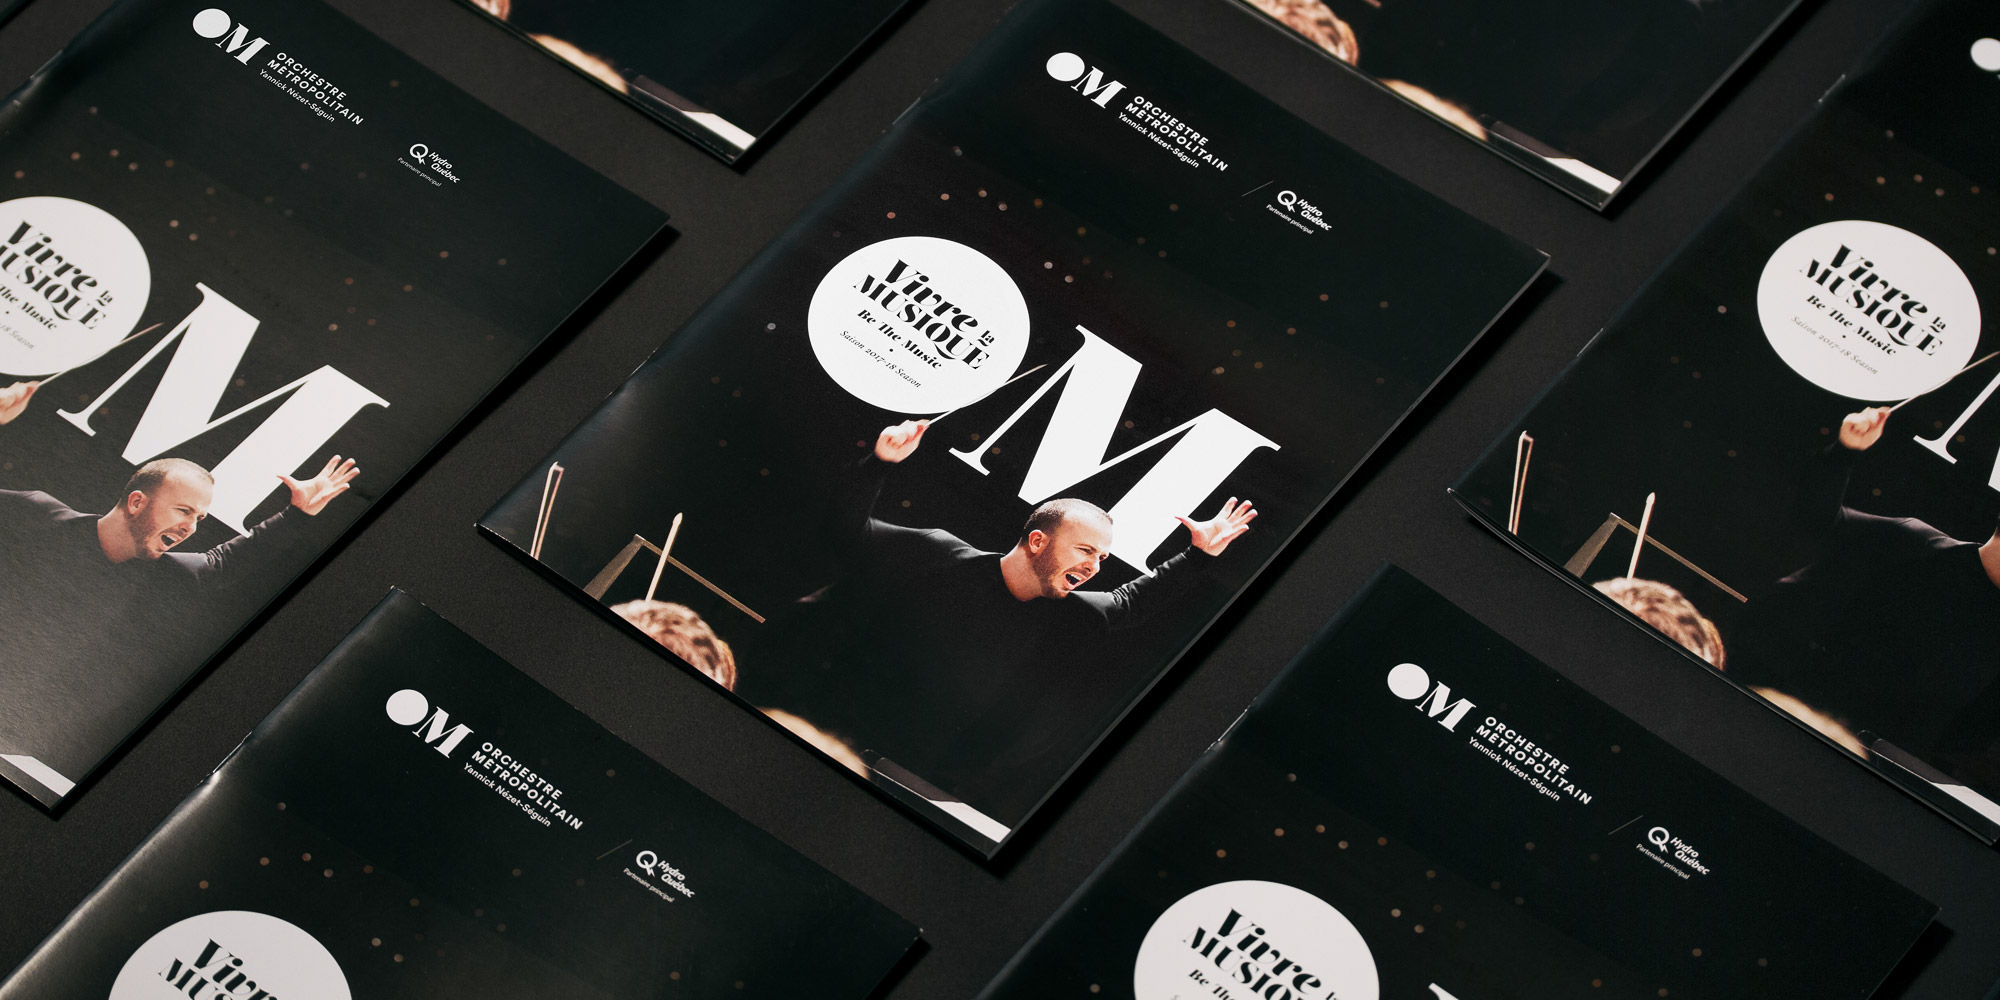 Brand Identity and Graphic Design for The Metropolitain Orchestra 